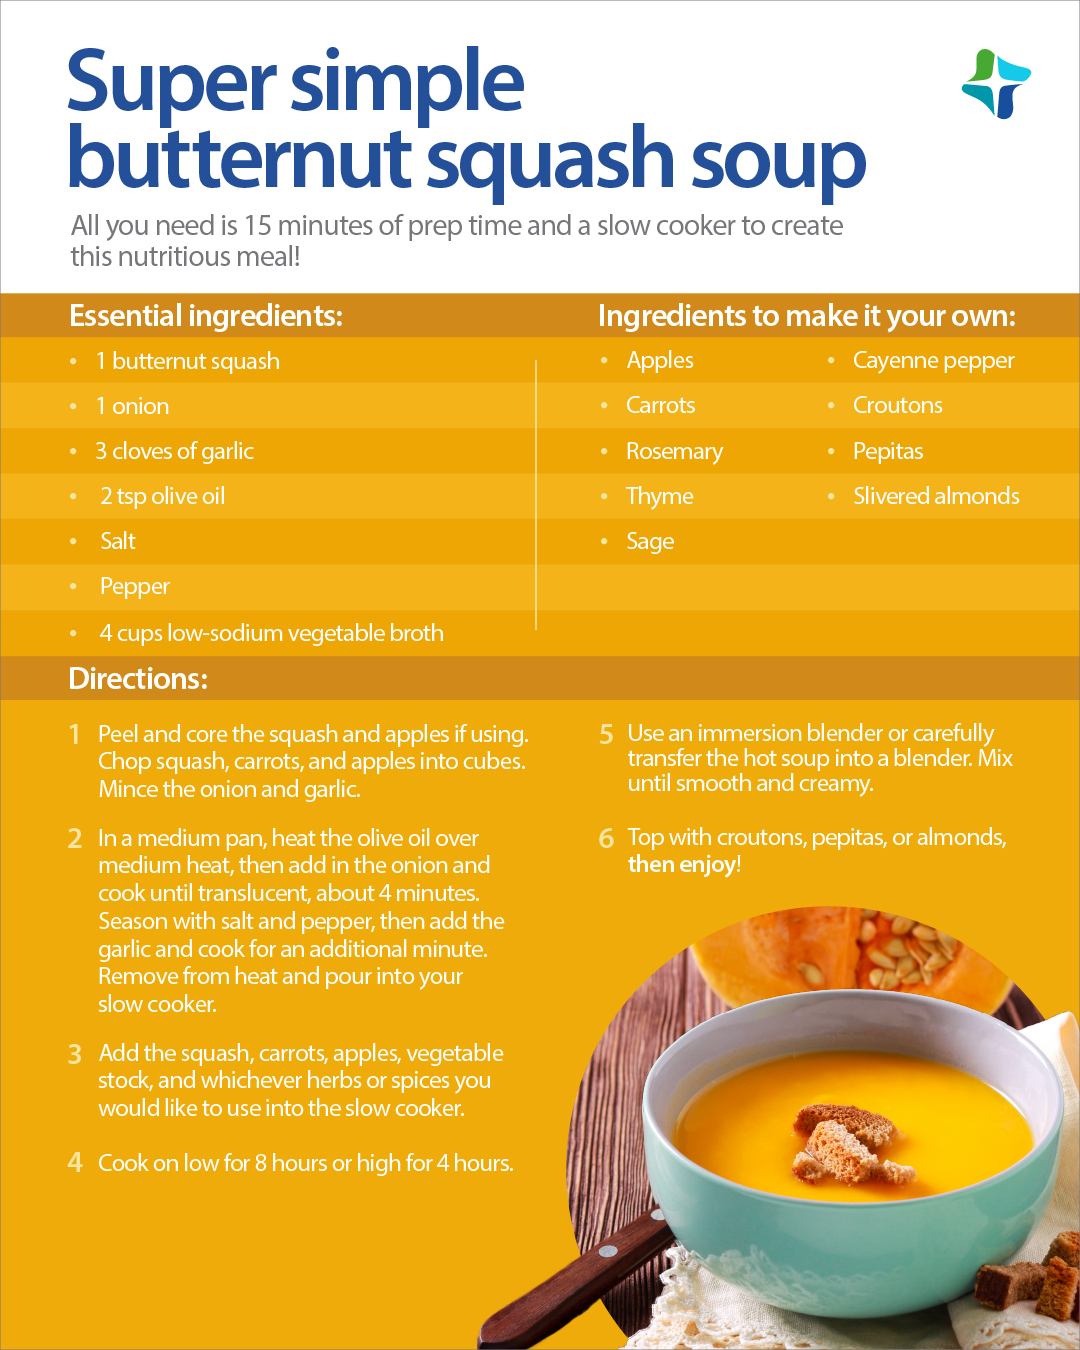 An infographic shares a simple recipe for butternut squash soup you can make in a slow cooker.  